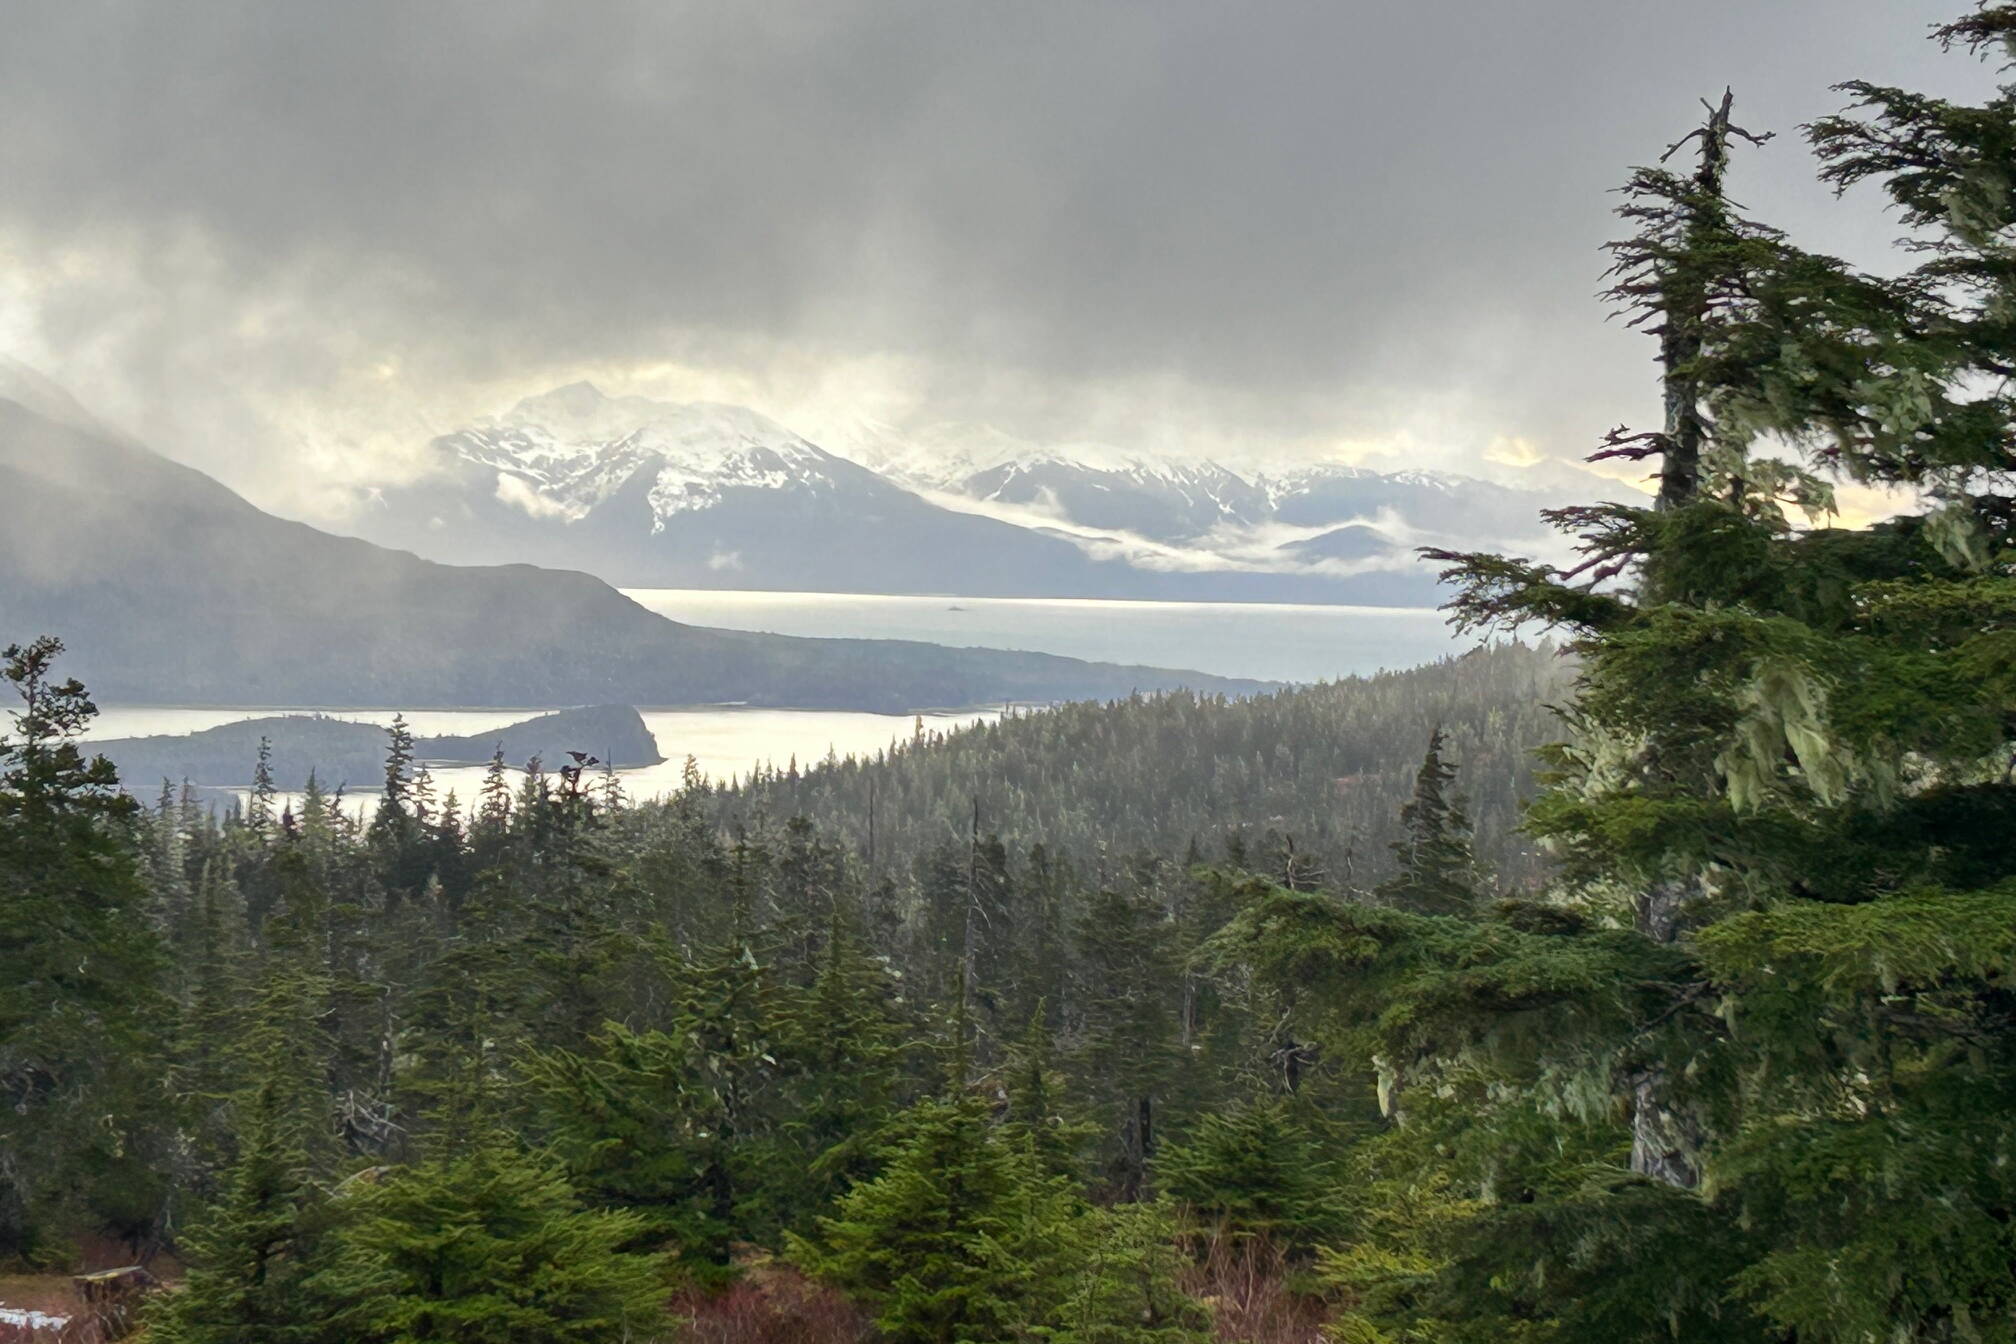 A bit of a sun break as seen from the John Muir Cabin, submitted on Dec. 6. (Photo by Deborah Rudis)